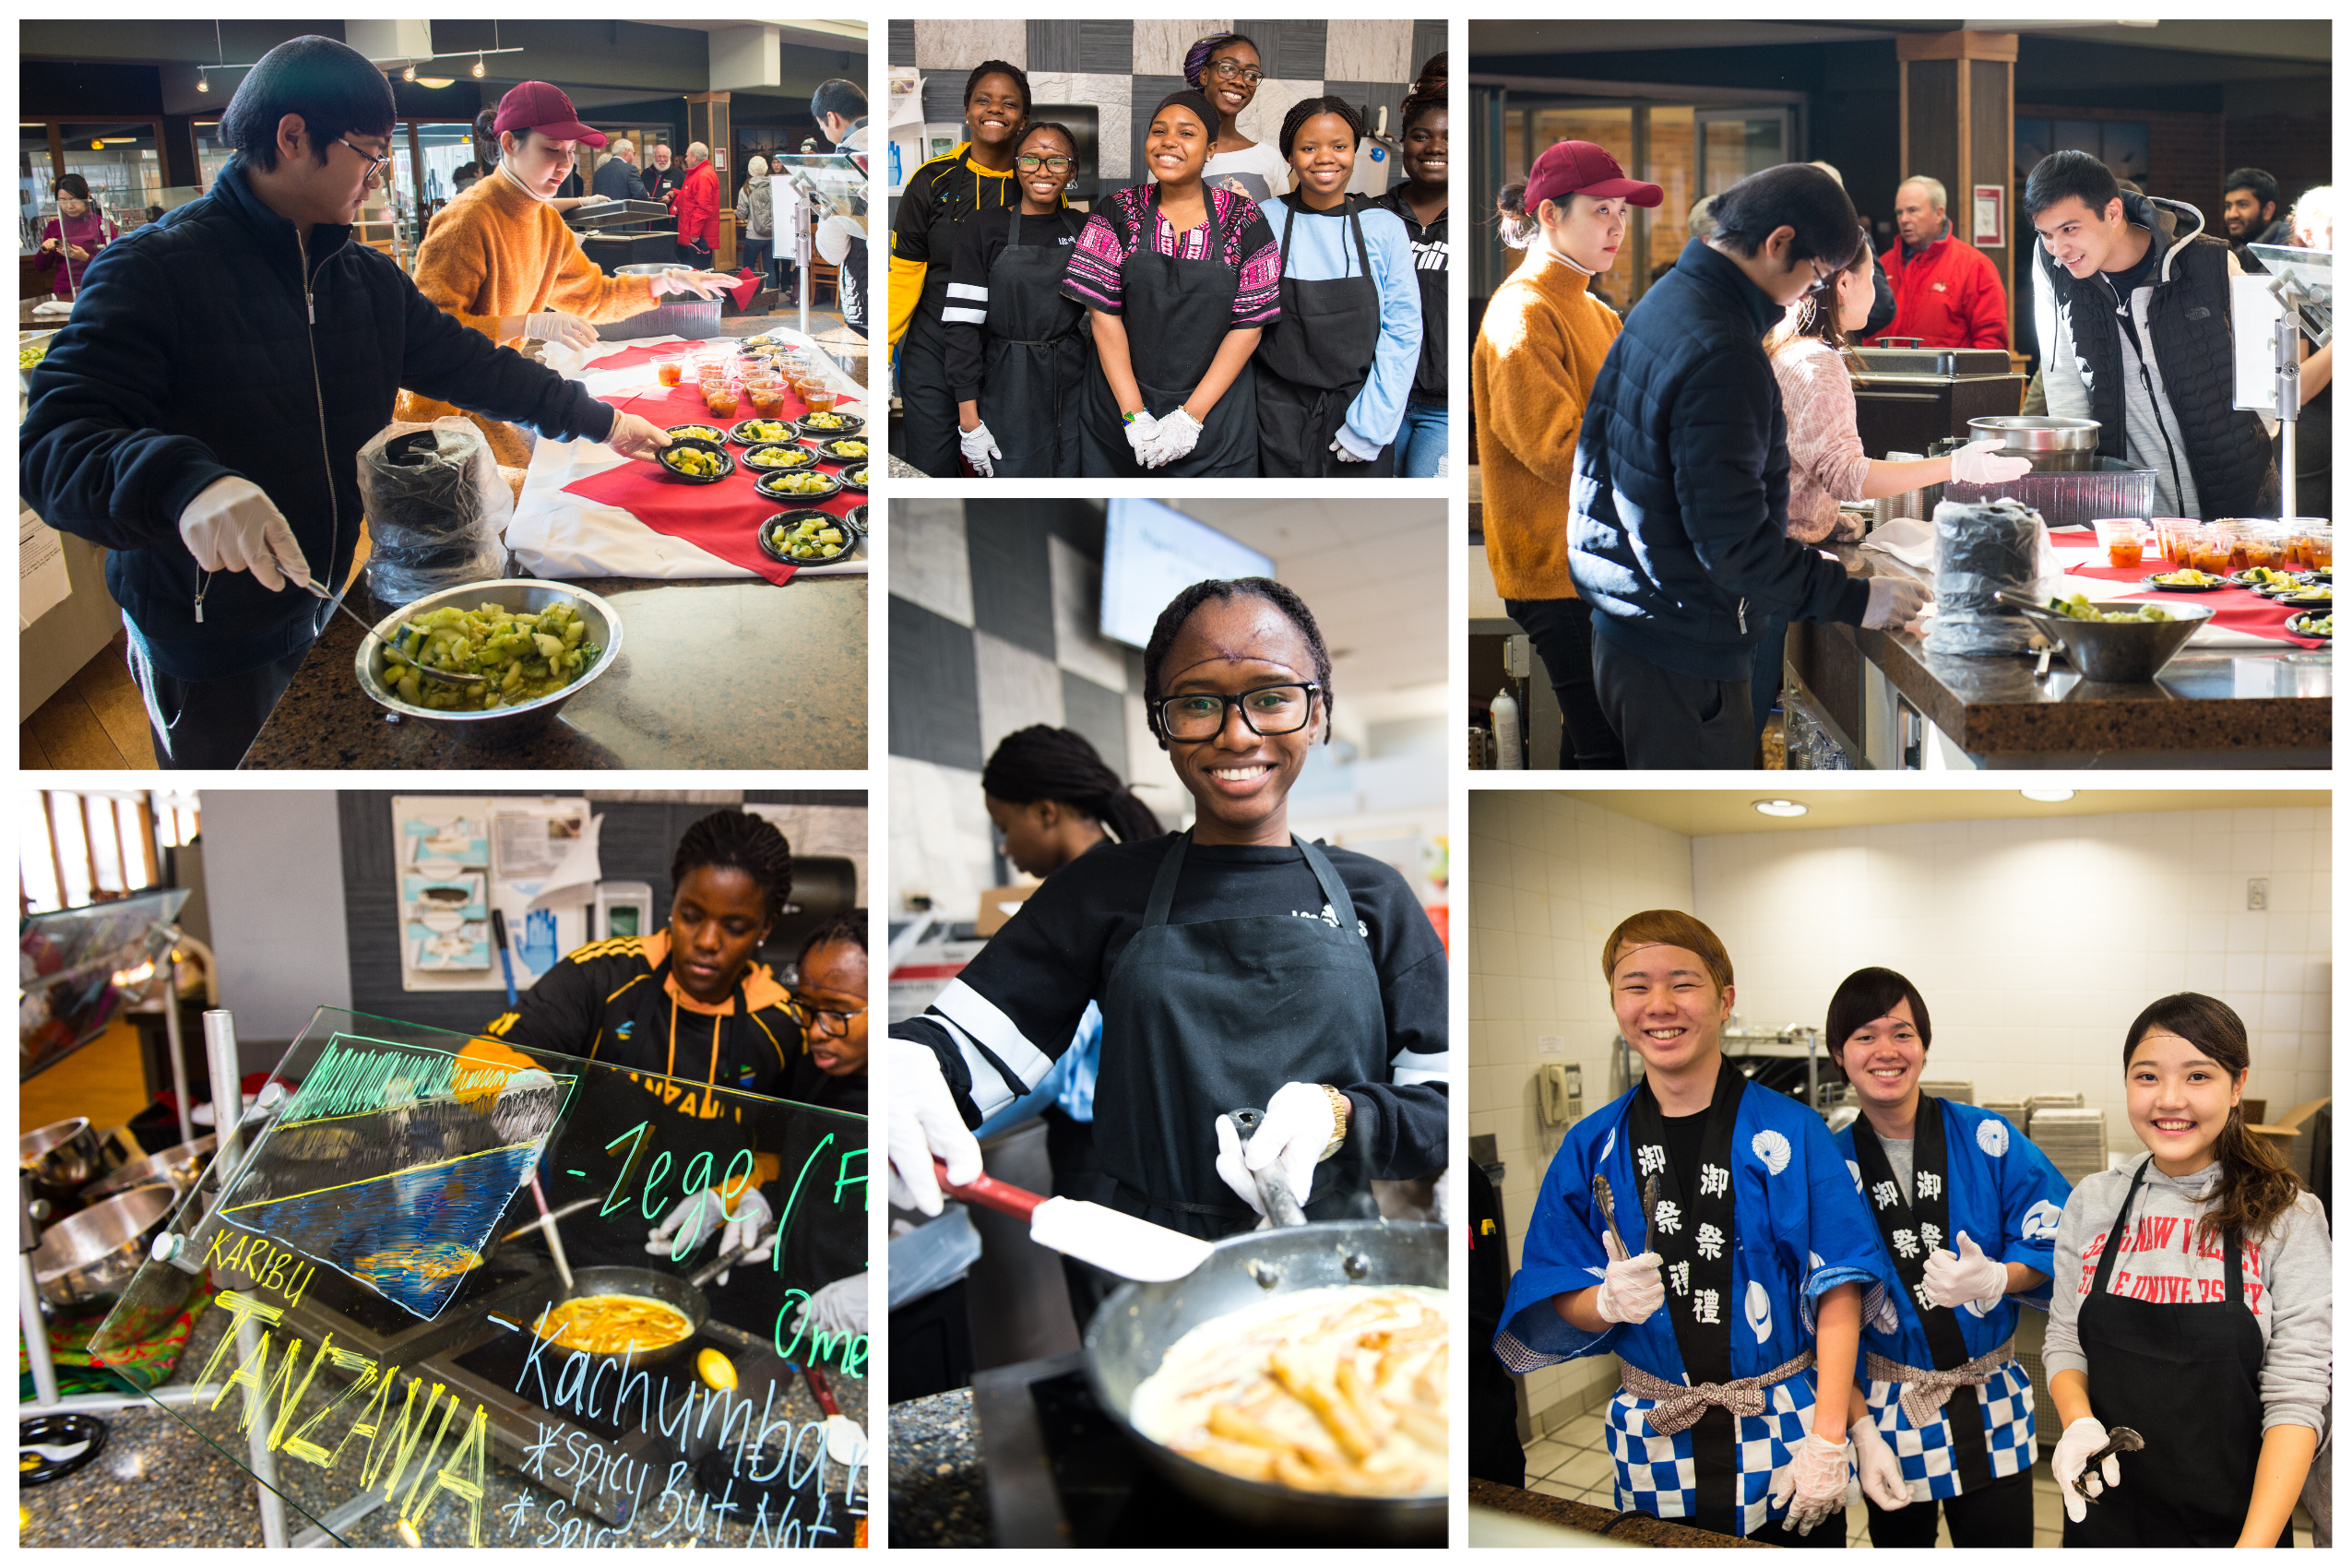 International students cooking and serving traditional foods